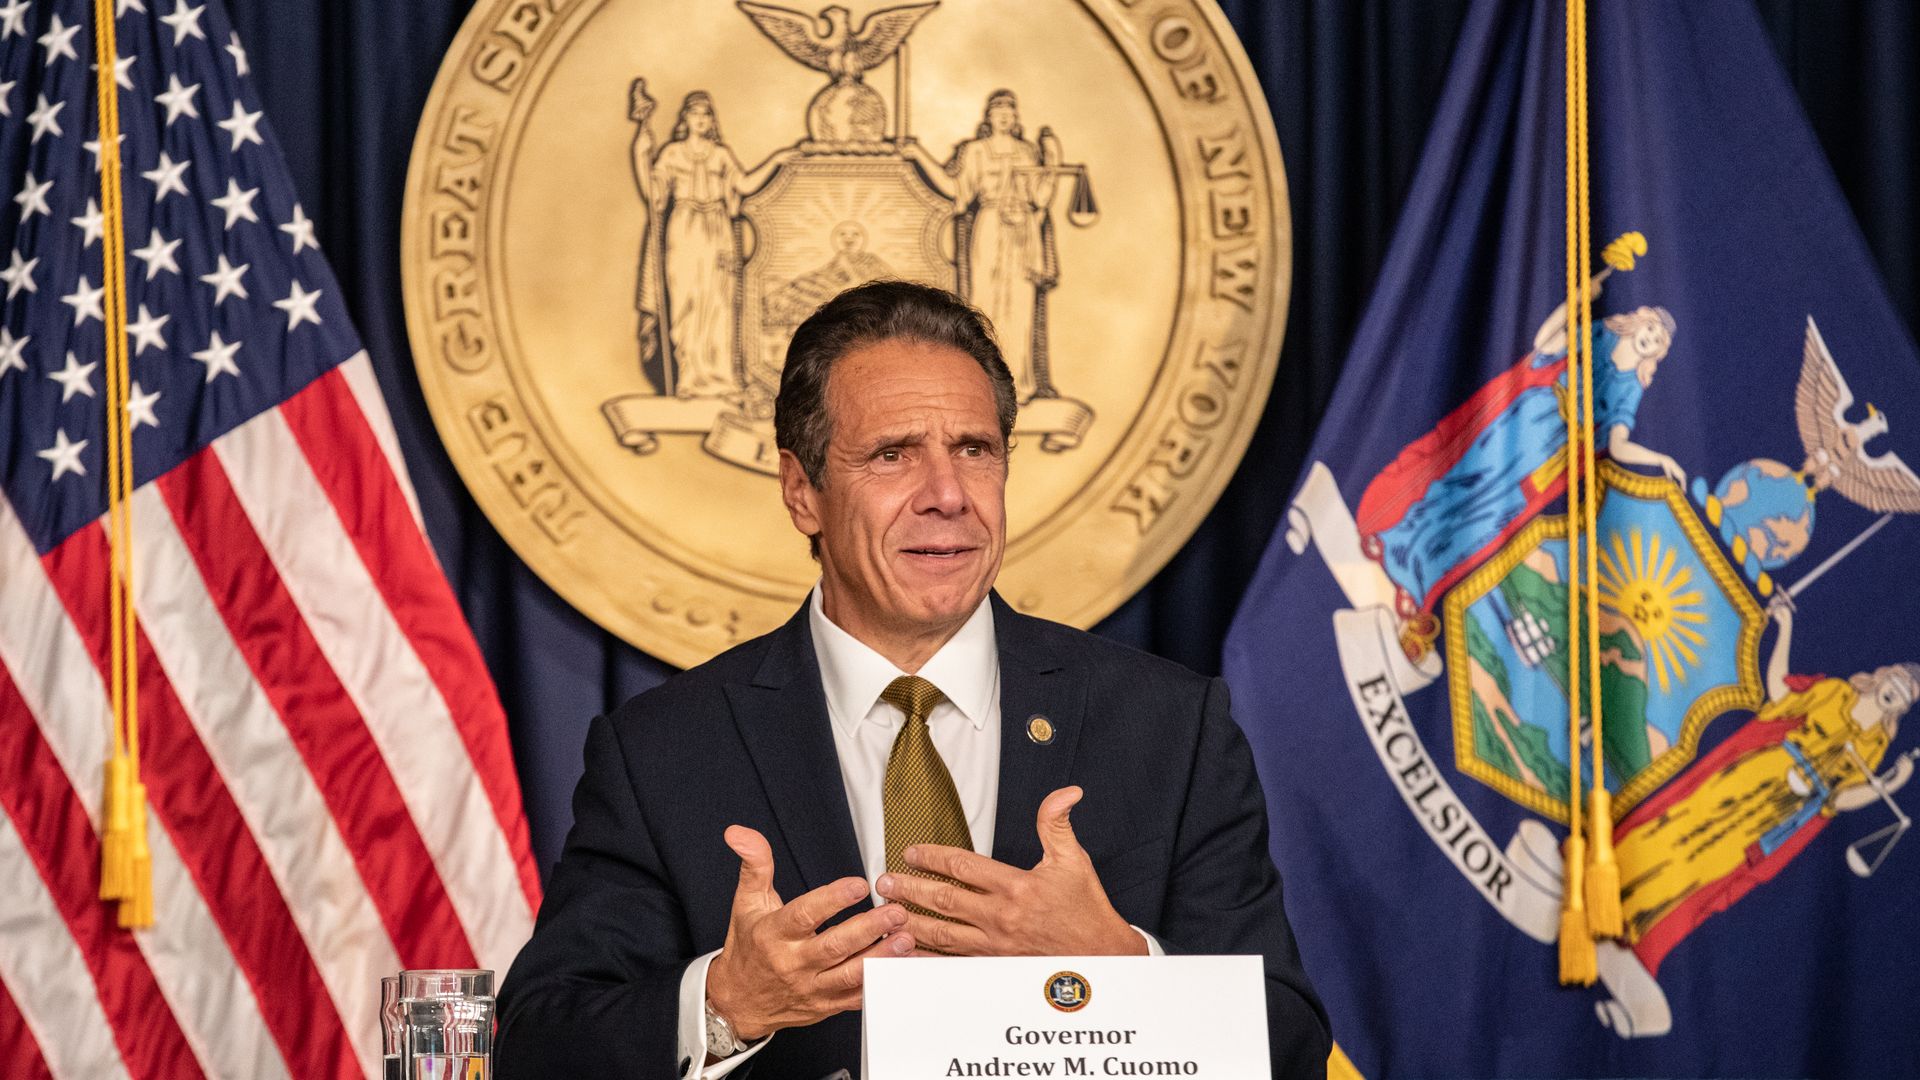 Andrew Cuomo, governor of New York, speaks during a news conference in New York, U.S., on Monday, Oct. 5